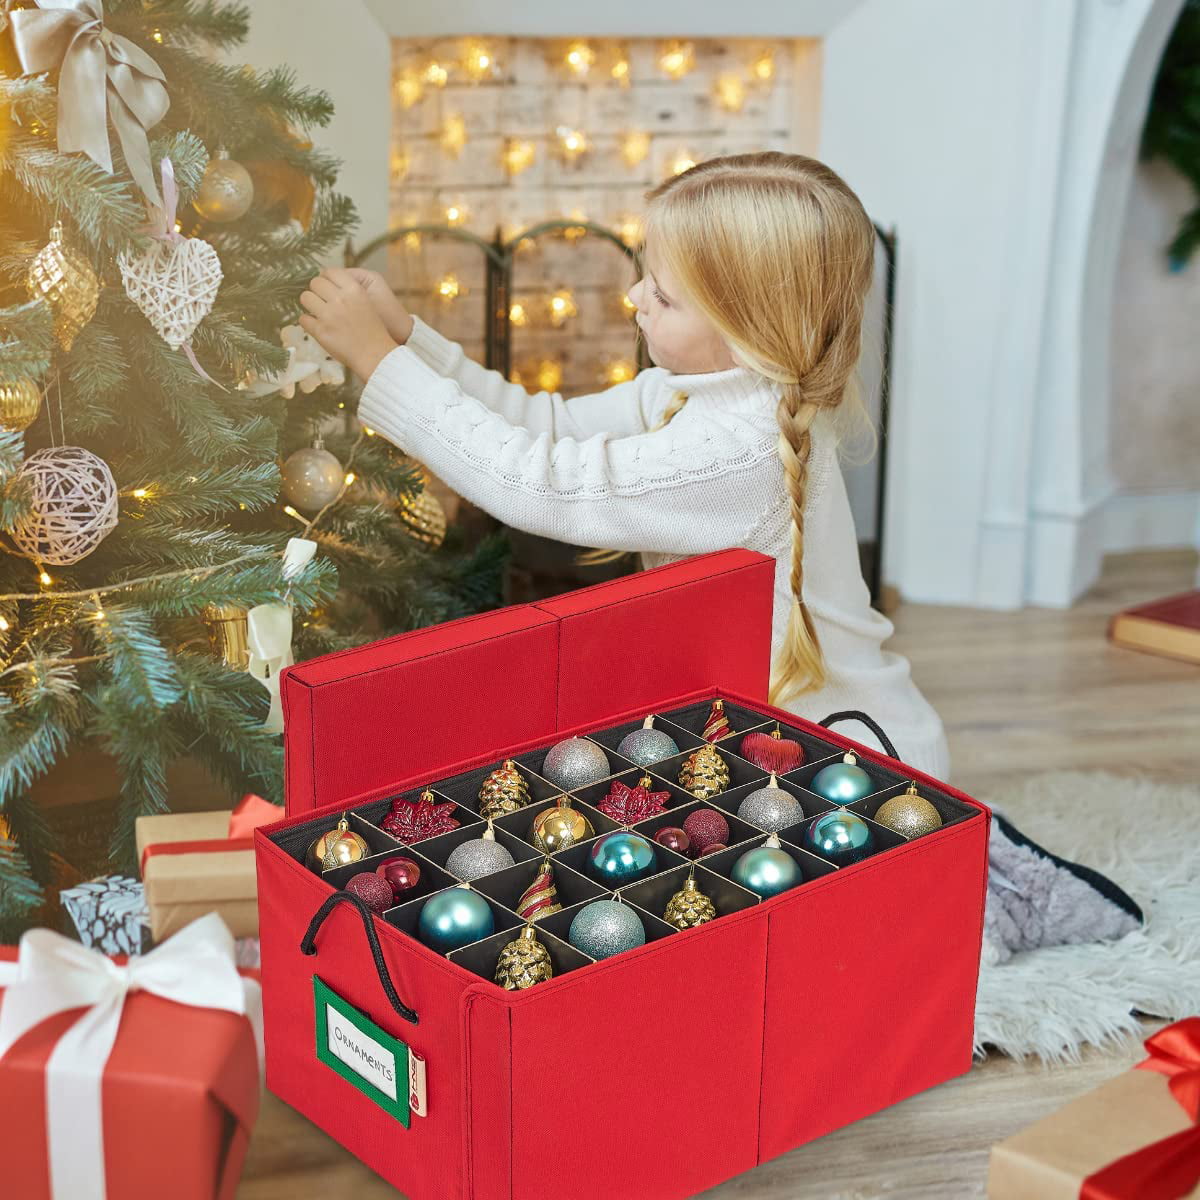 Best Deal for GTMANG-Christmas Ornament Storage Box with Dividers,Stores